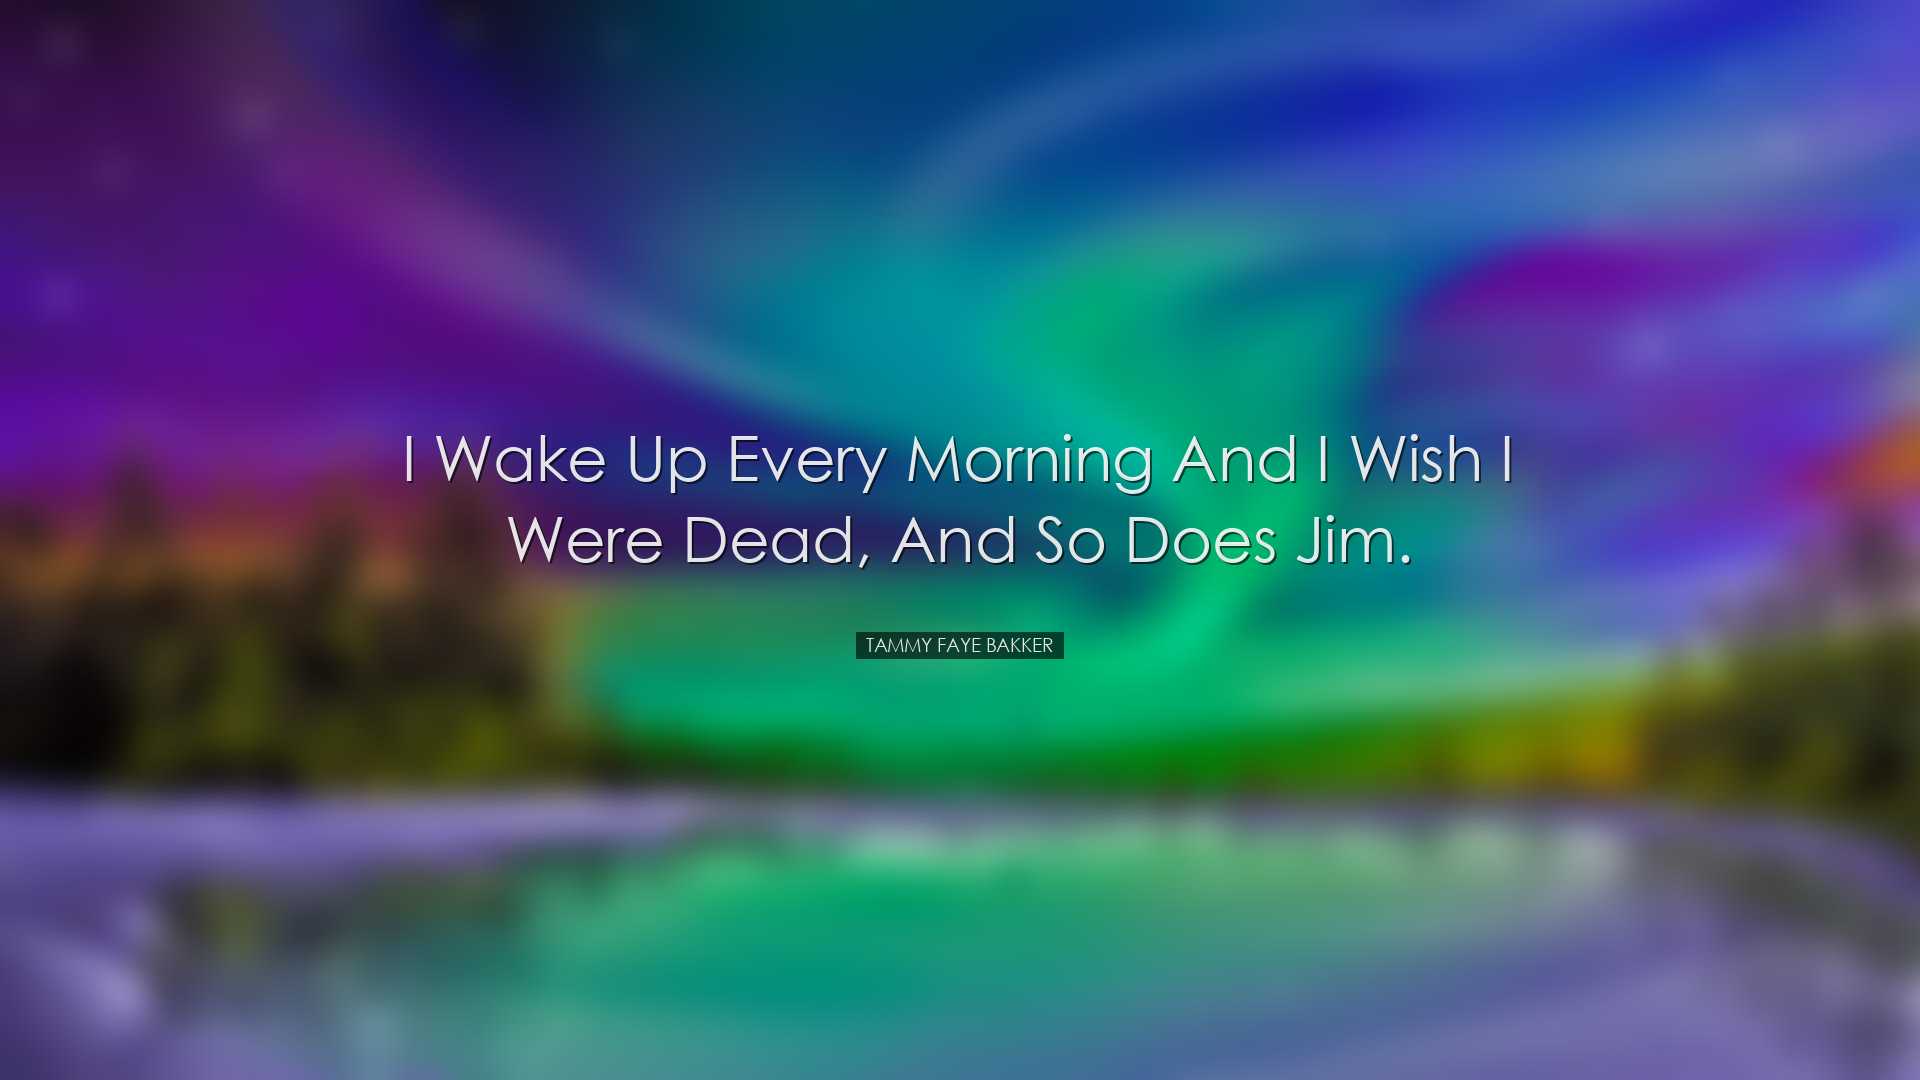 I wake up every morning and I wish I were dead, and so does Jim. -